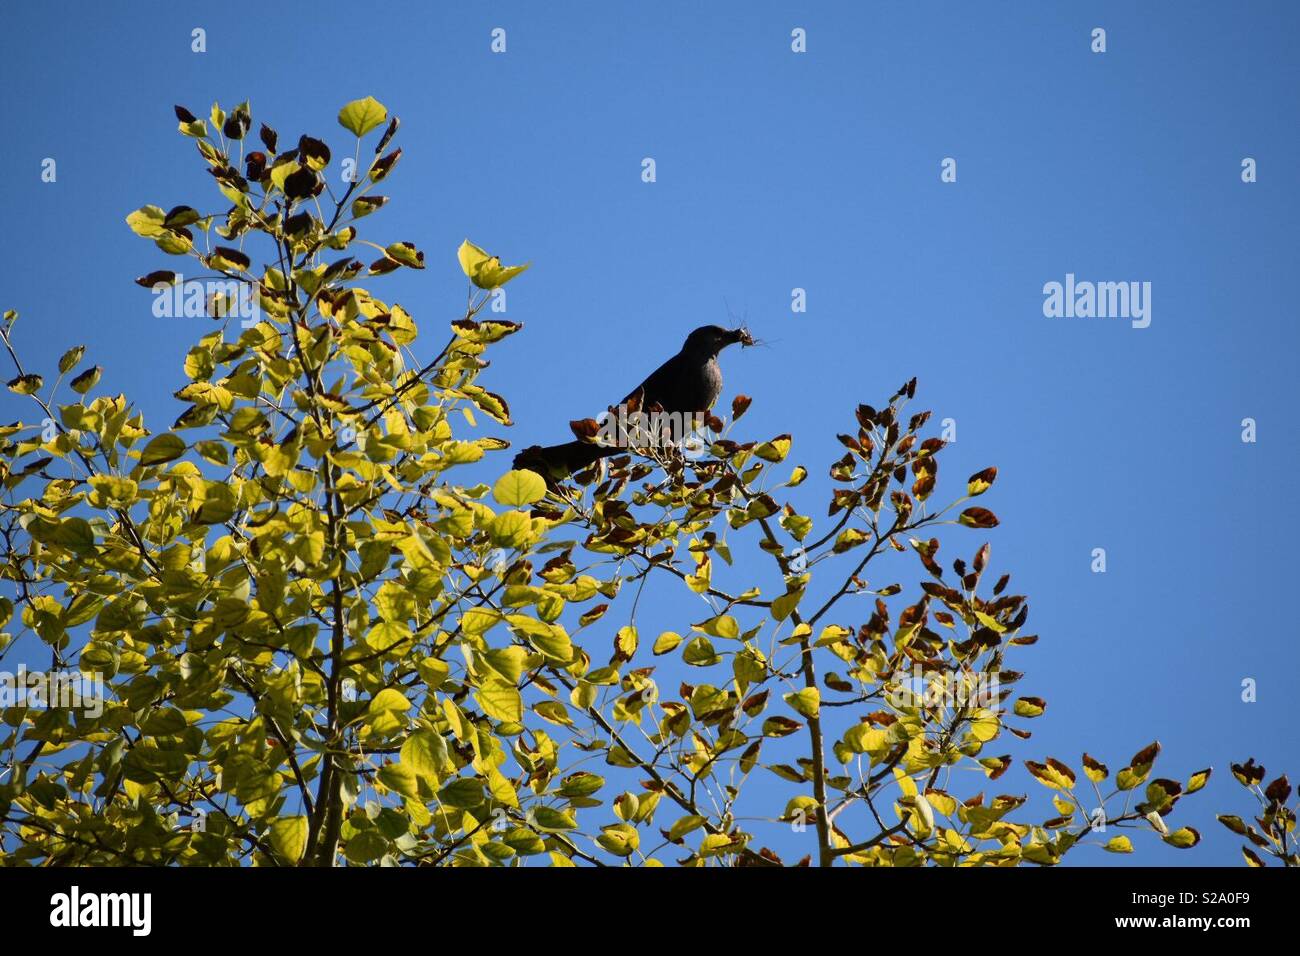 Bird in a tree with a snack Stock Photo